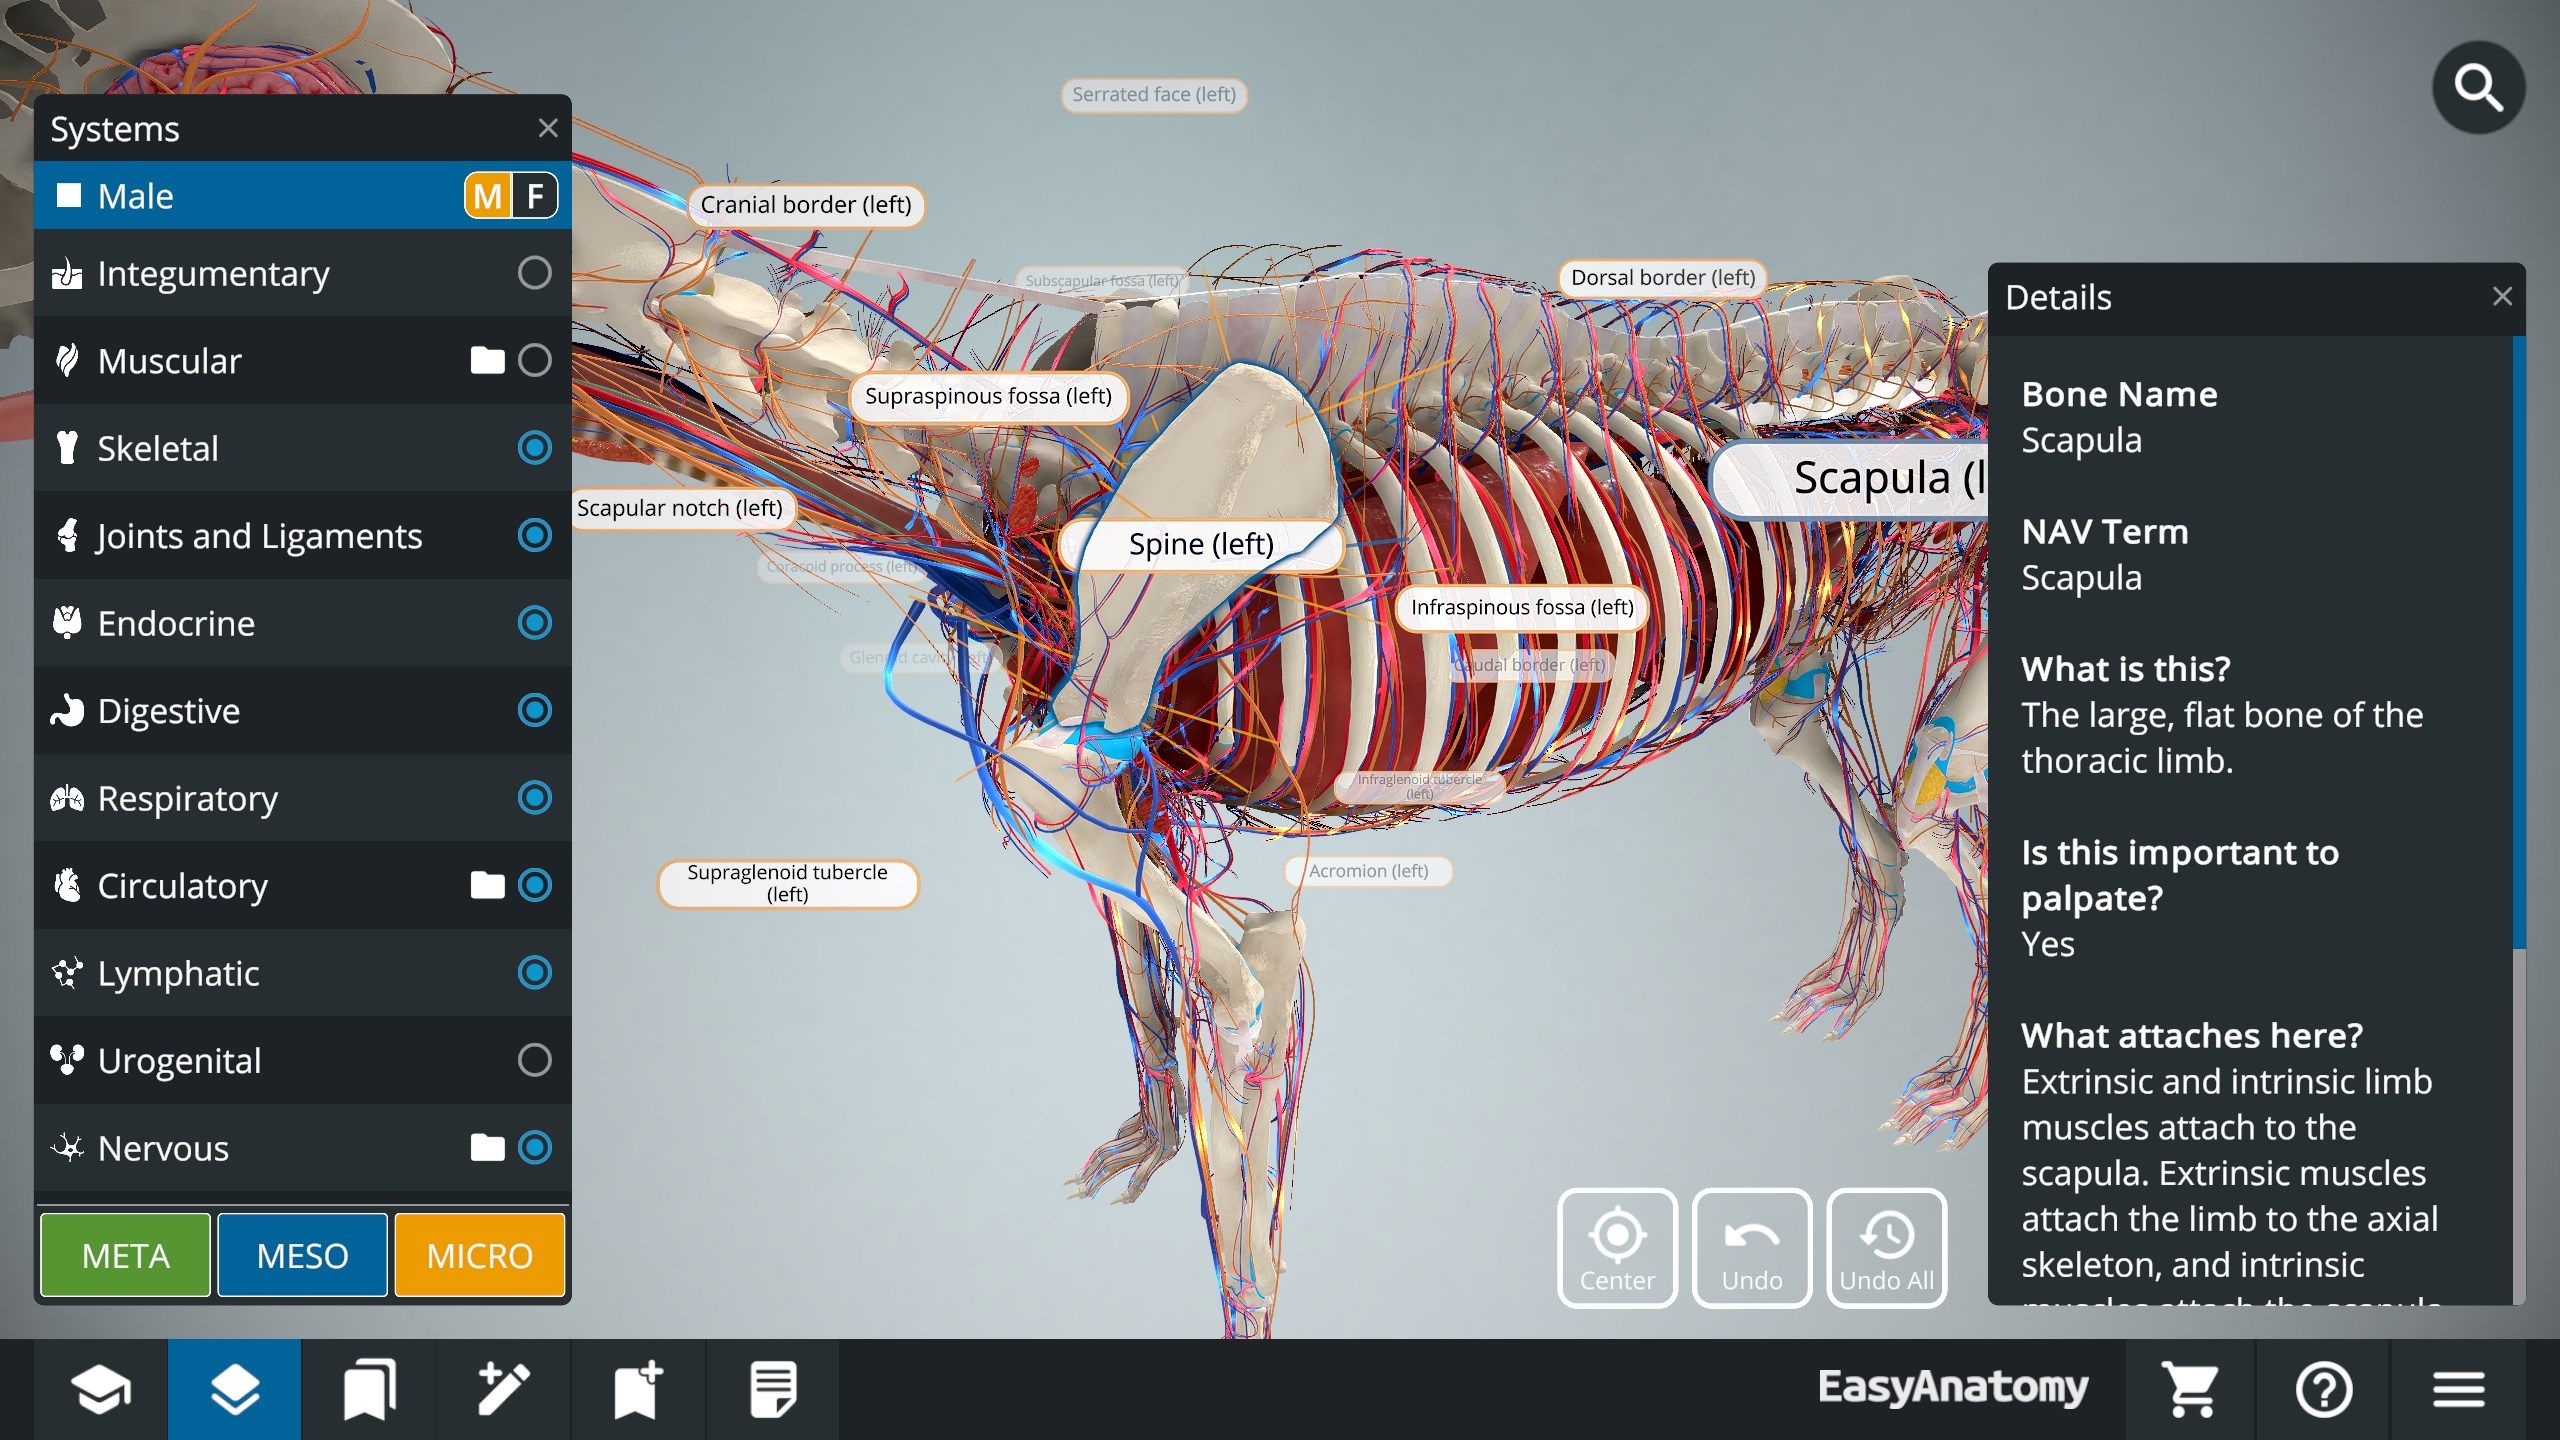 Use structure labels to help identify key structures of the anatomy. With our adaptive level of detail, you can zoom in to see more detailed "Meso" and "Micro" labels to identify features and tubercles on individual components.